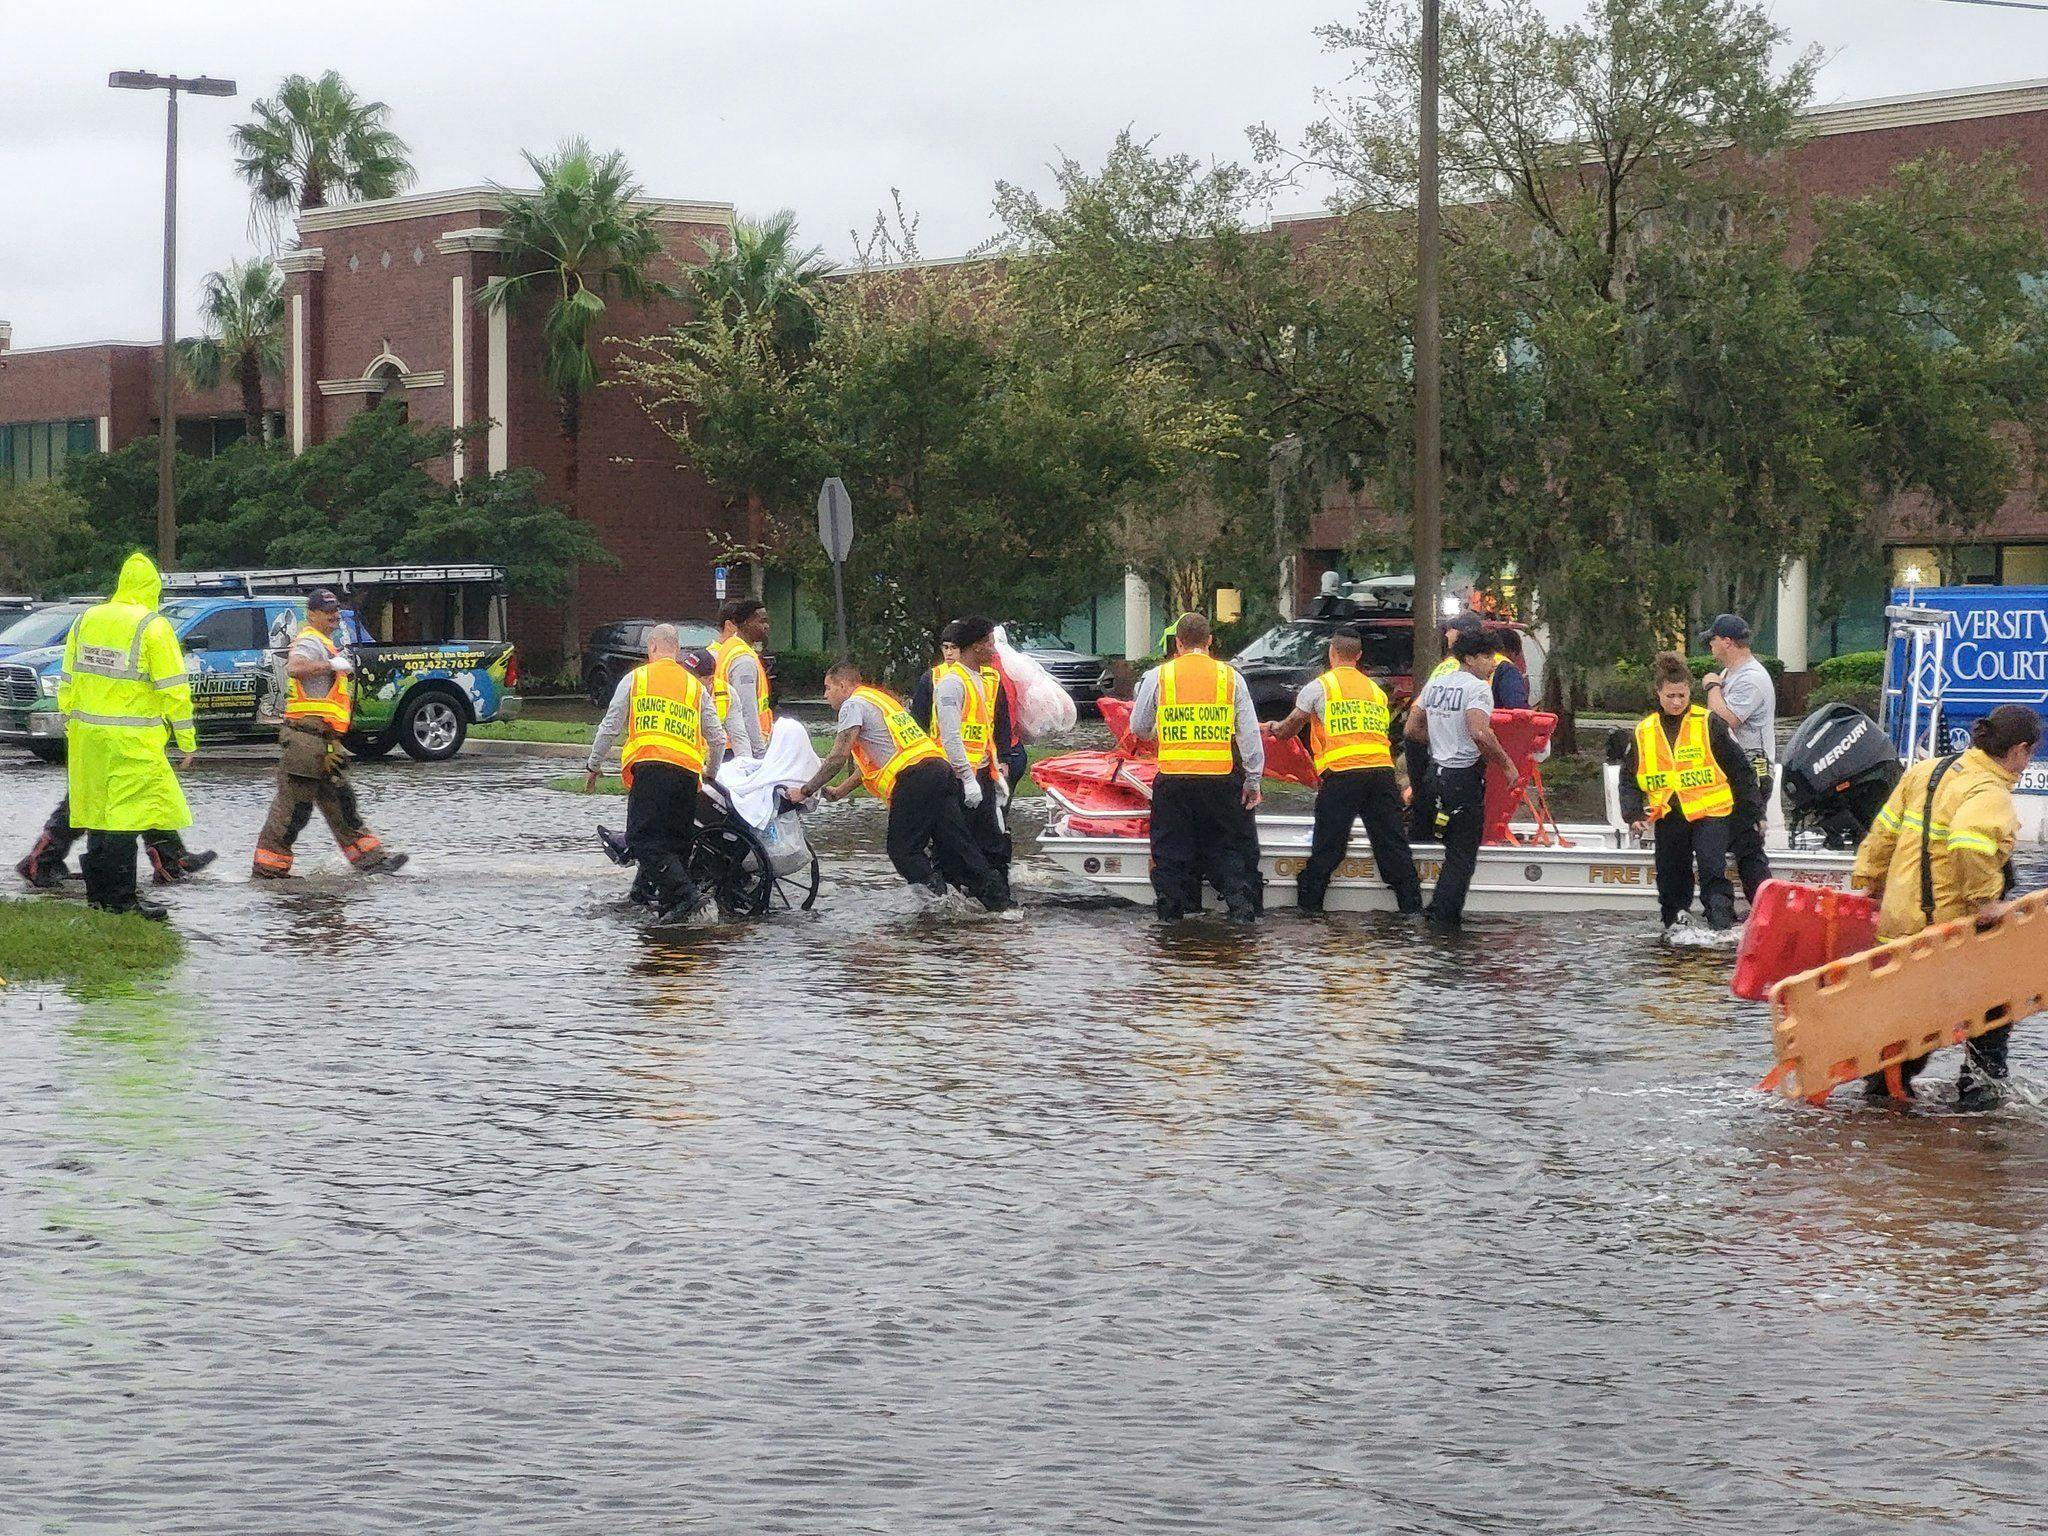 The Orange County Fire Rescue evacuates residents from an assisted living facility near Orlando Thursday. (Photo by Orange County Fire Rescue.)